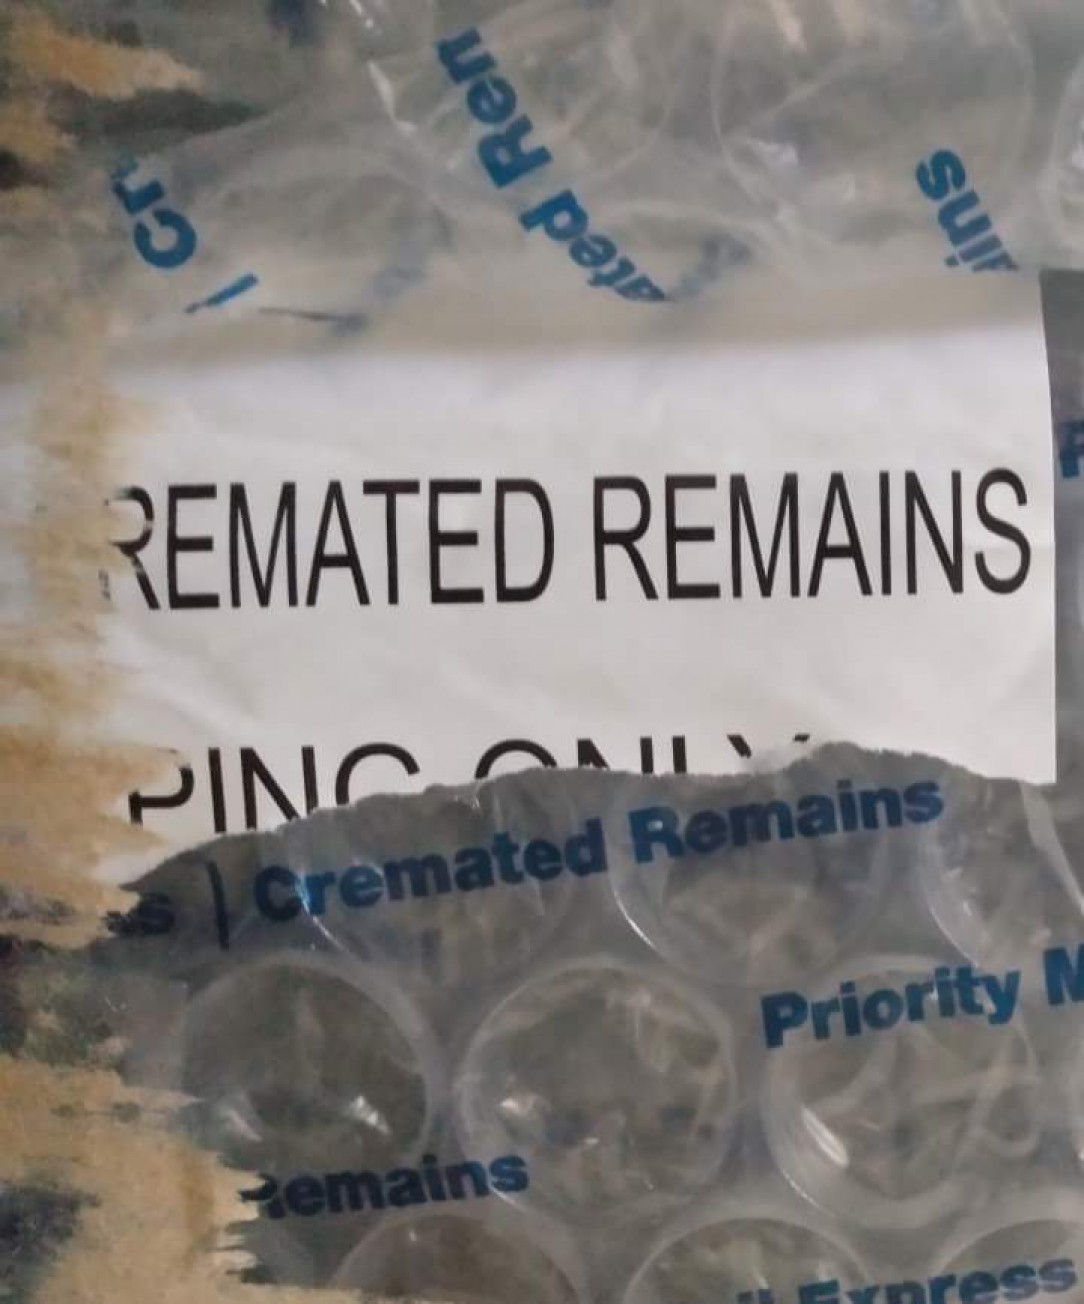 A seller re-used &quot;cremated remains&quot; packaging to ship a package